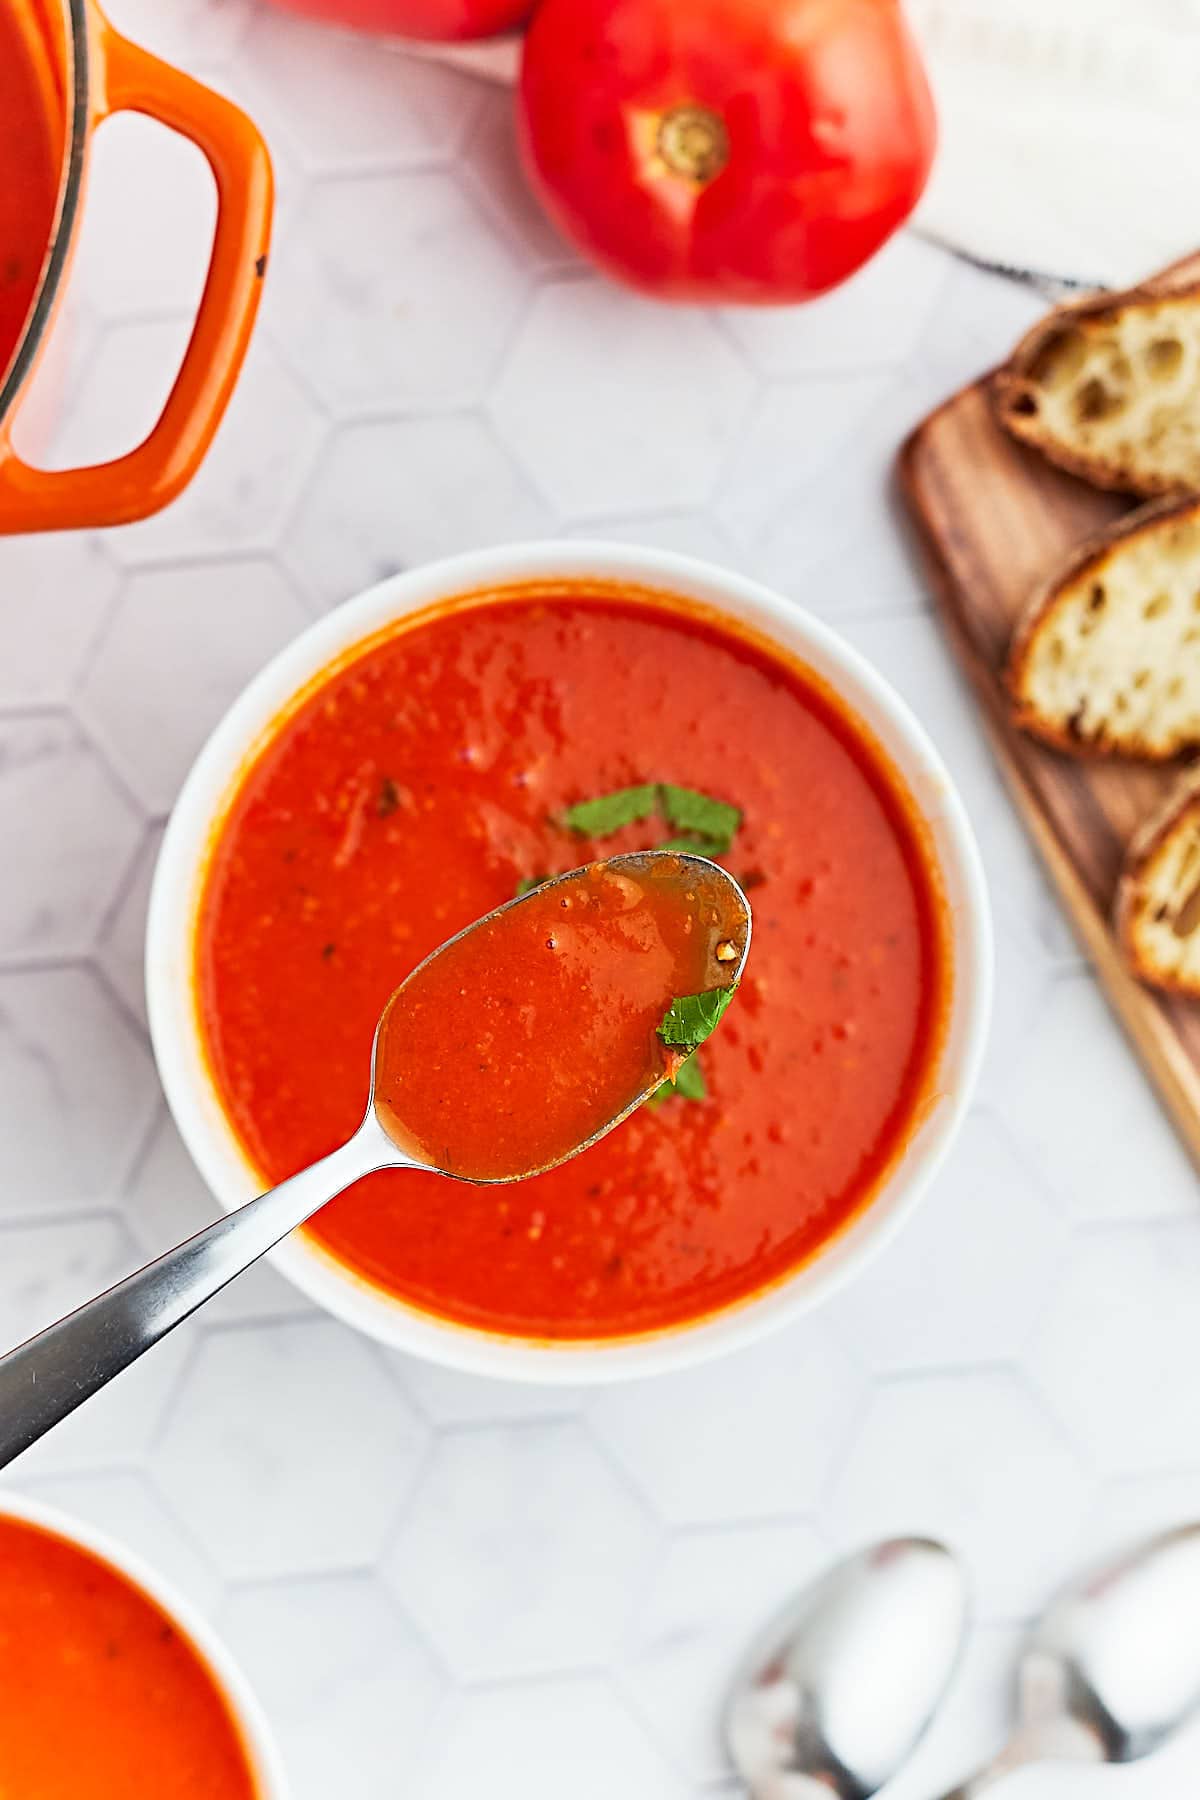 A spoonful of hot, freshly cooked Tomato Soup.